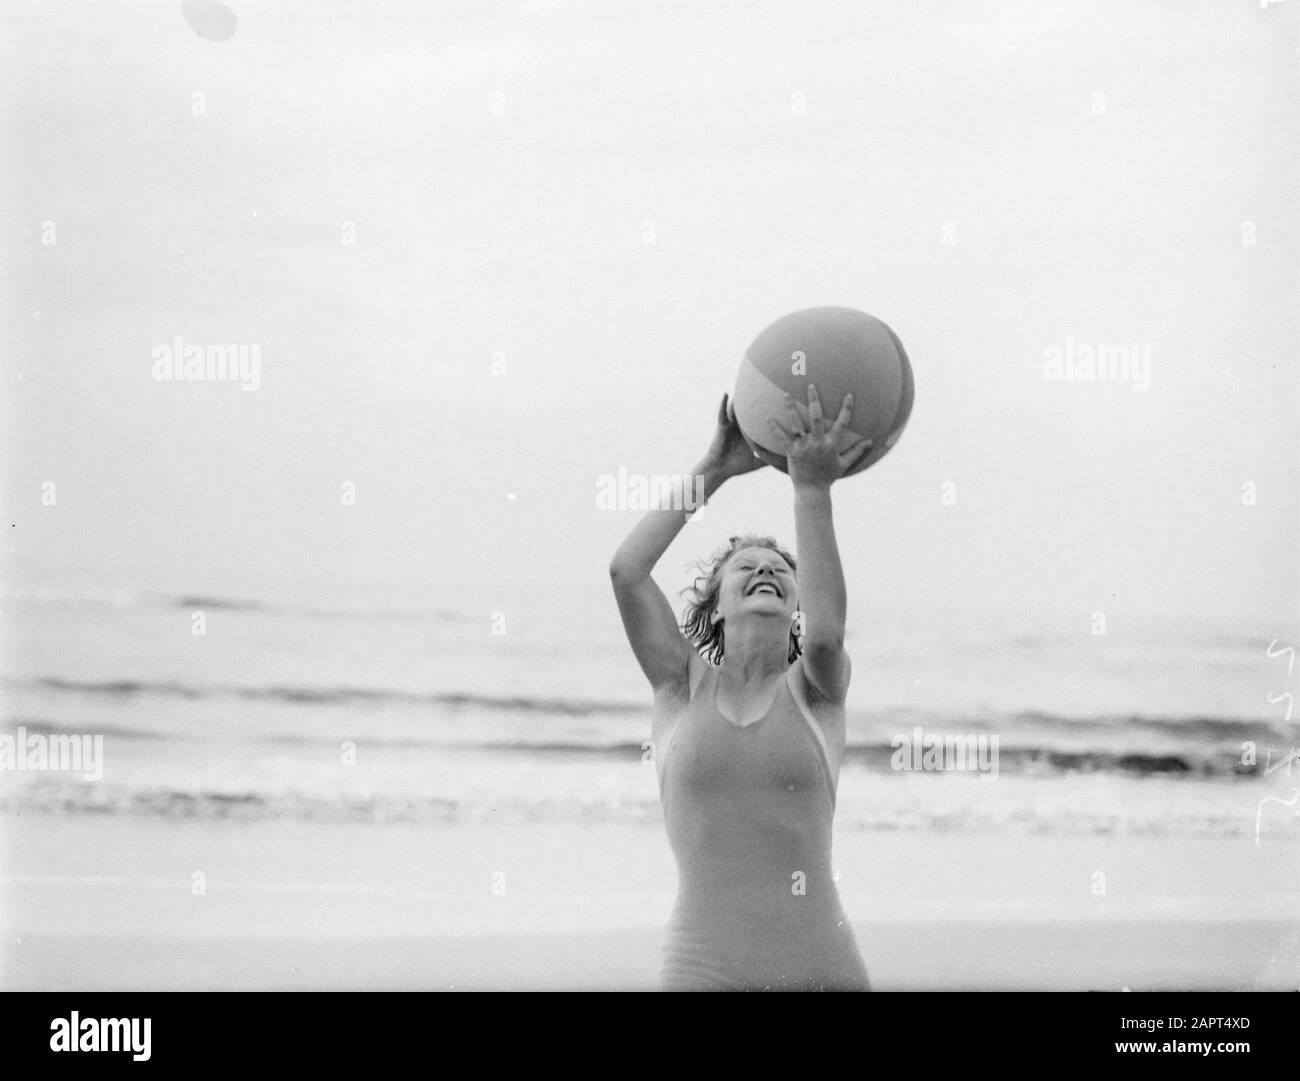 Reportage model  Eva Waldschmidt plays with a ball on the beach Date: 1932 Location: Noord-Holland, Zandvoort Keywords: balls, photo models, beaches Personal name: Waldschmidt, Eva Stock Photo